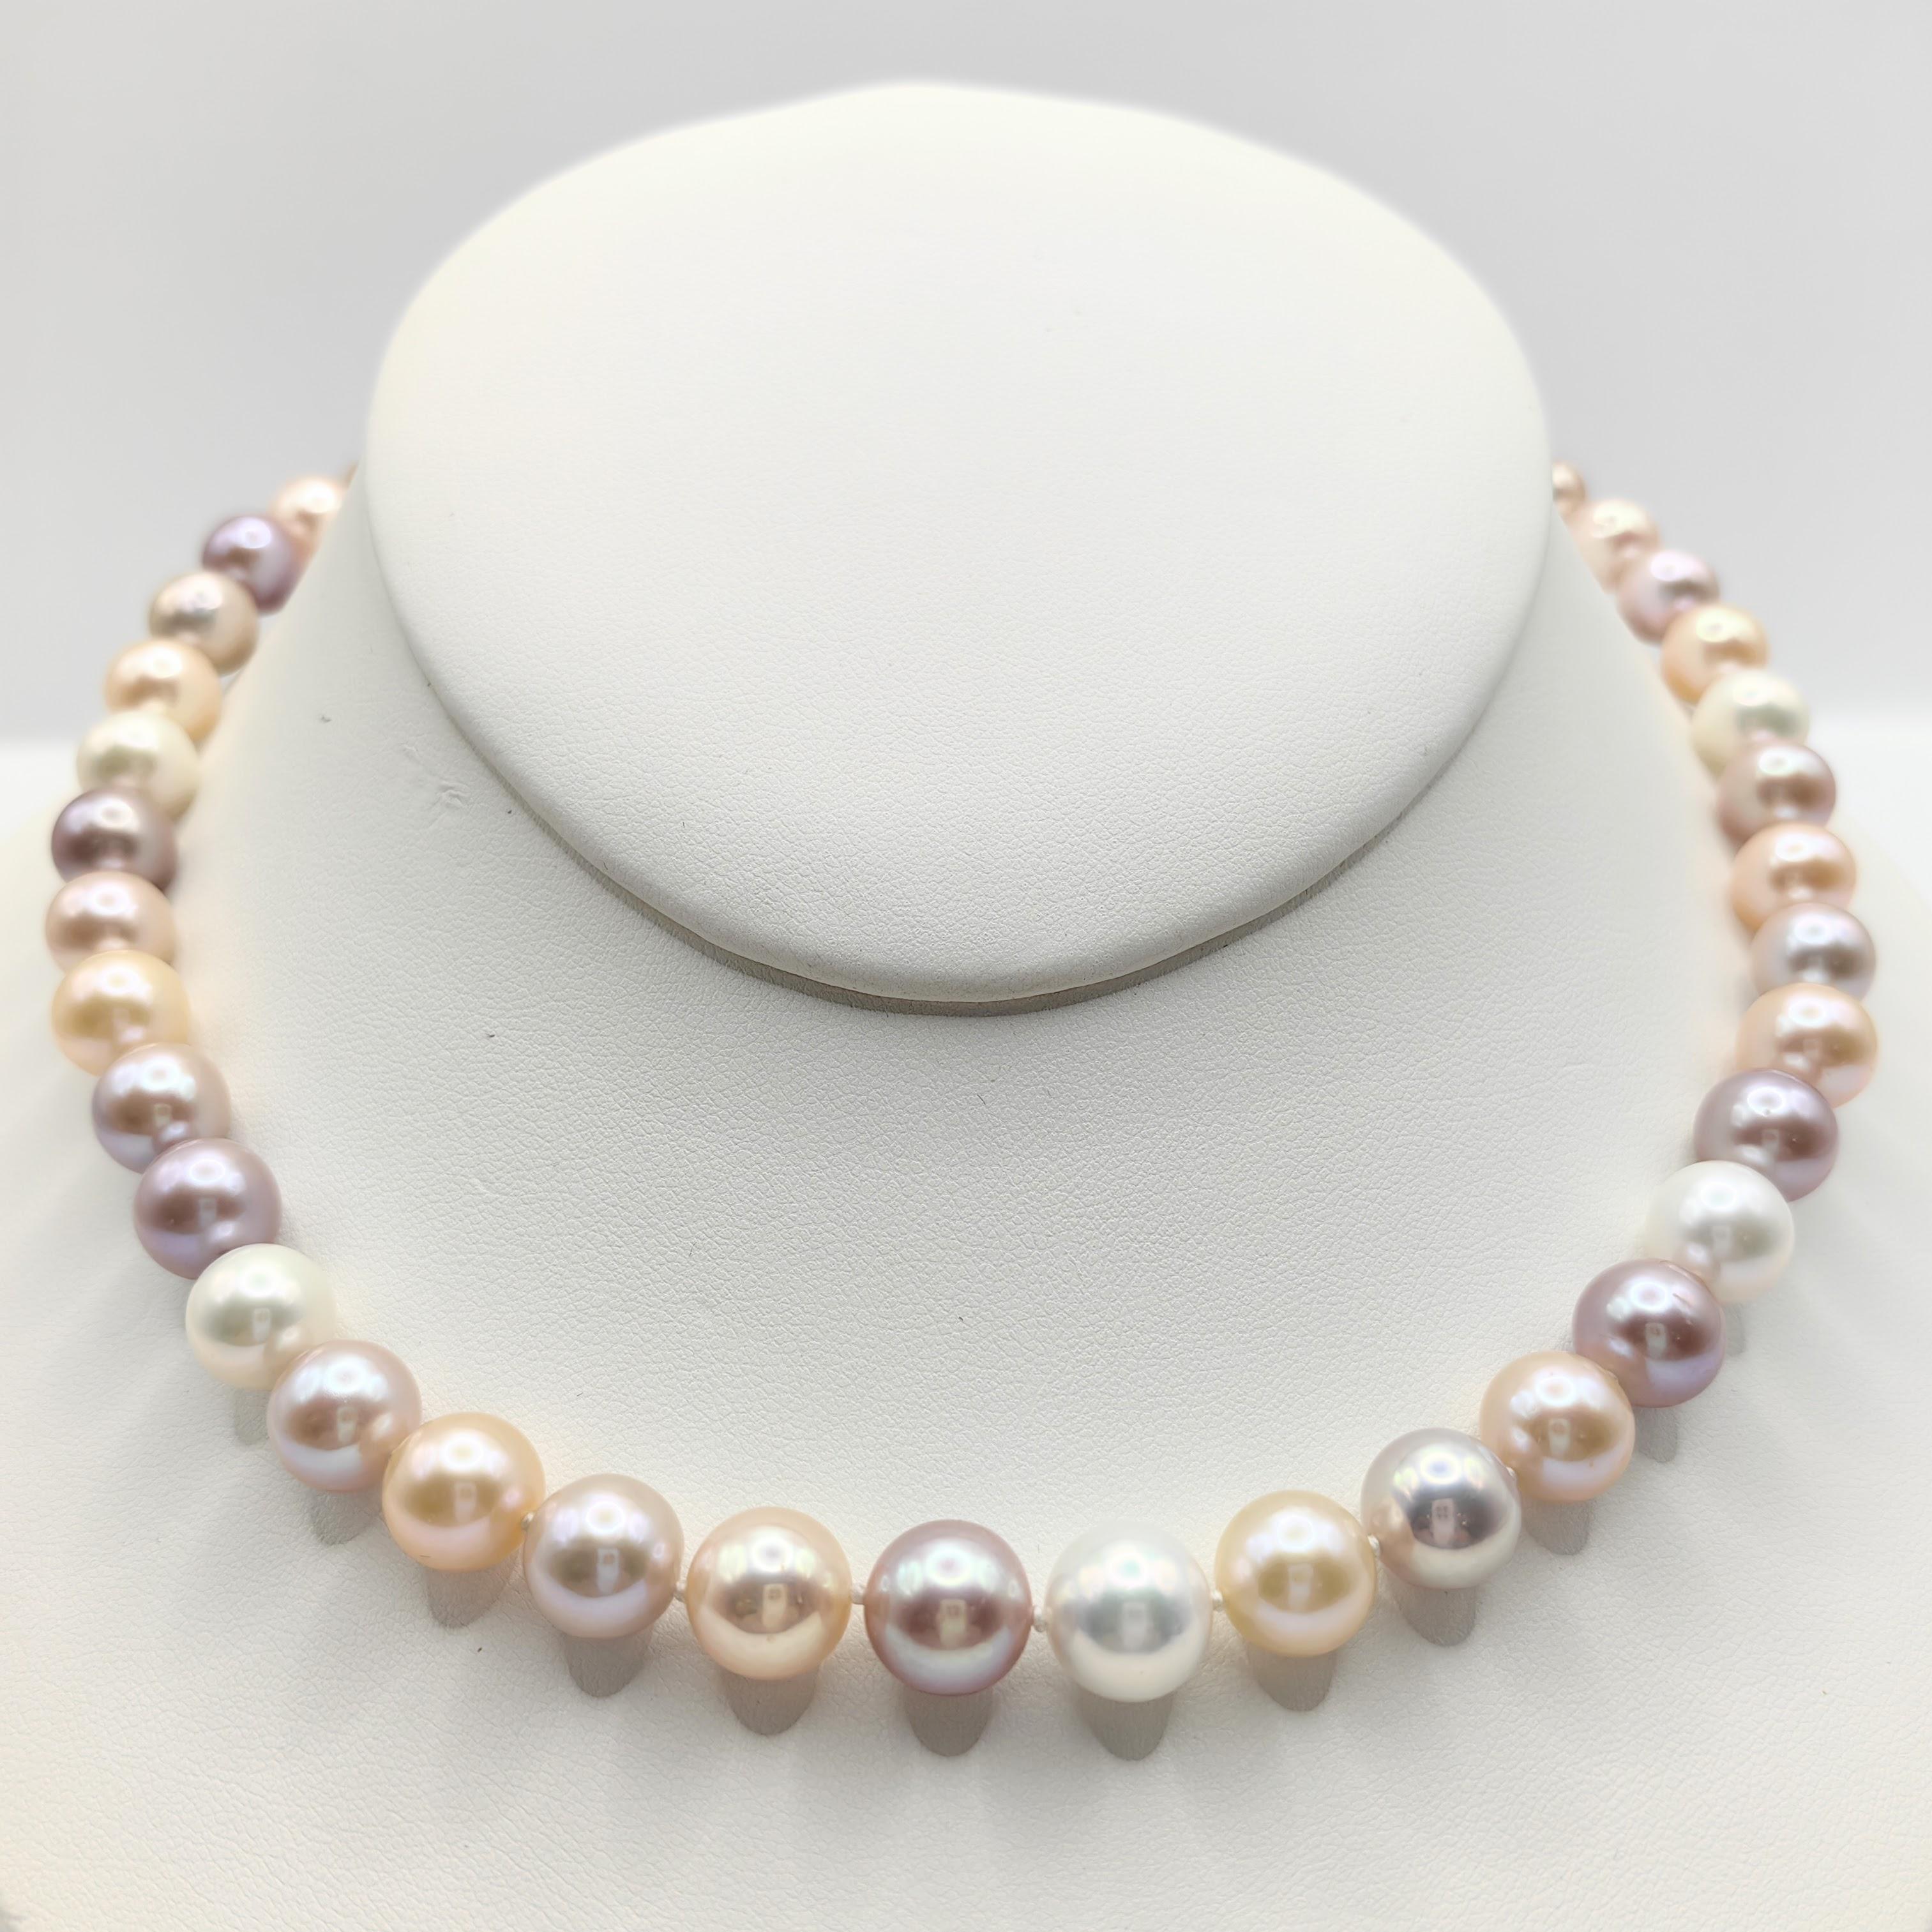 9-10mm Candy Pastel Multi-Color Round Pearl Necklace with 18K Gold Clasp For Sale 1